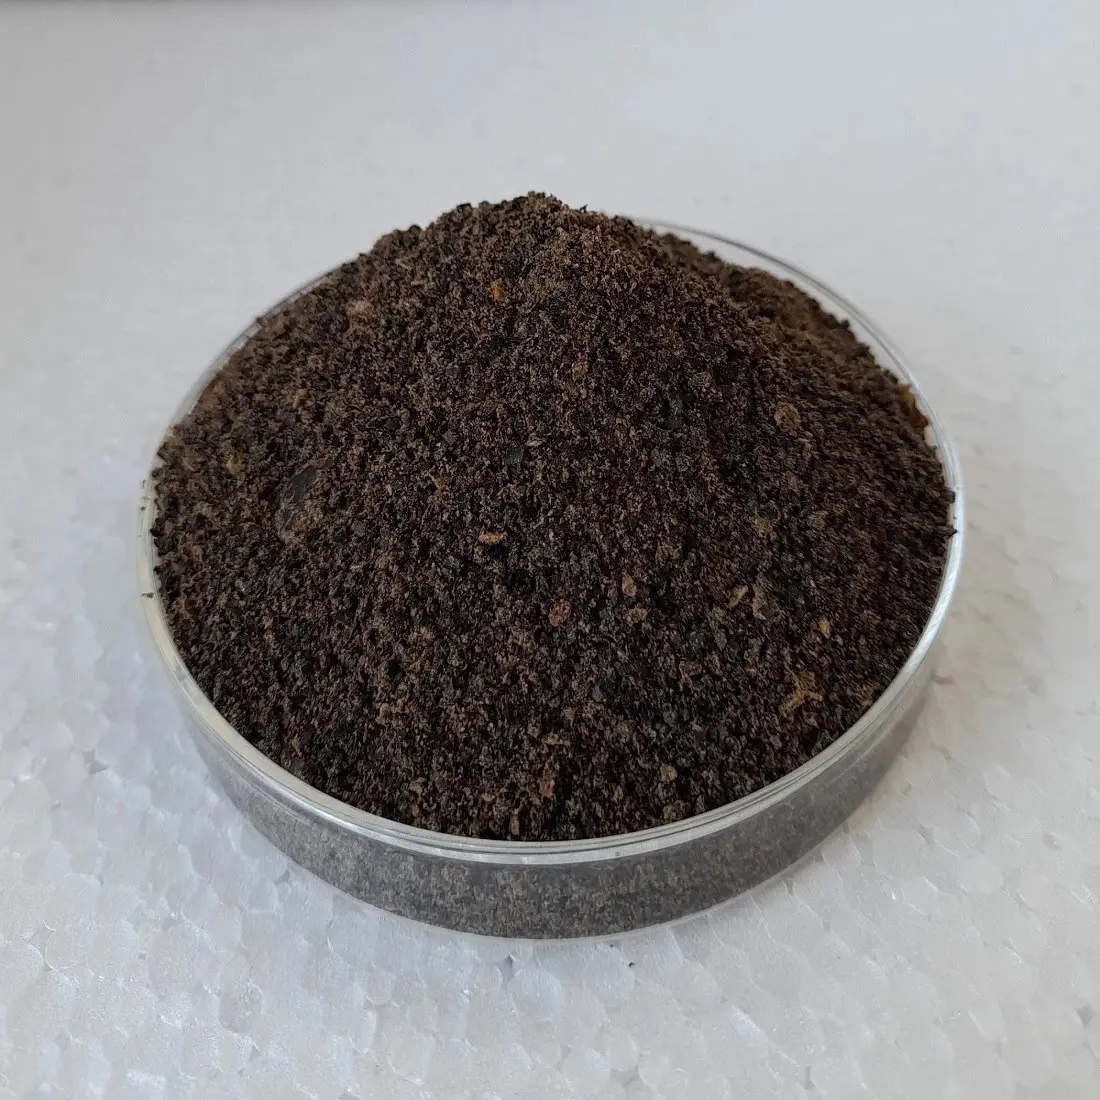 100% Organic Having Nutrients For Plant Growth Fertilizer Castor Cake Powder Export Worldwide From India